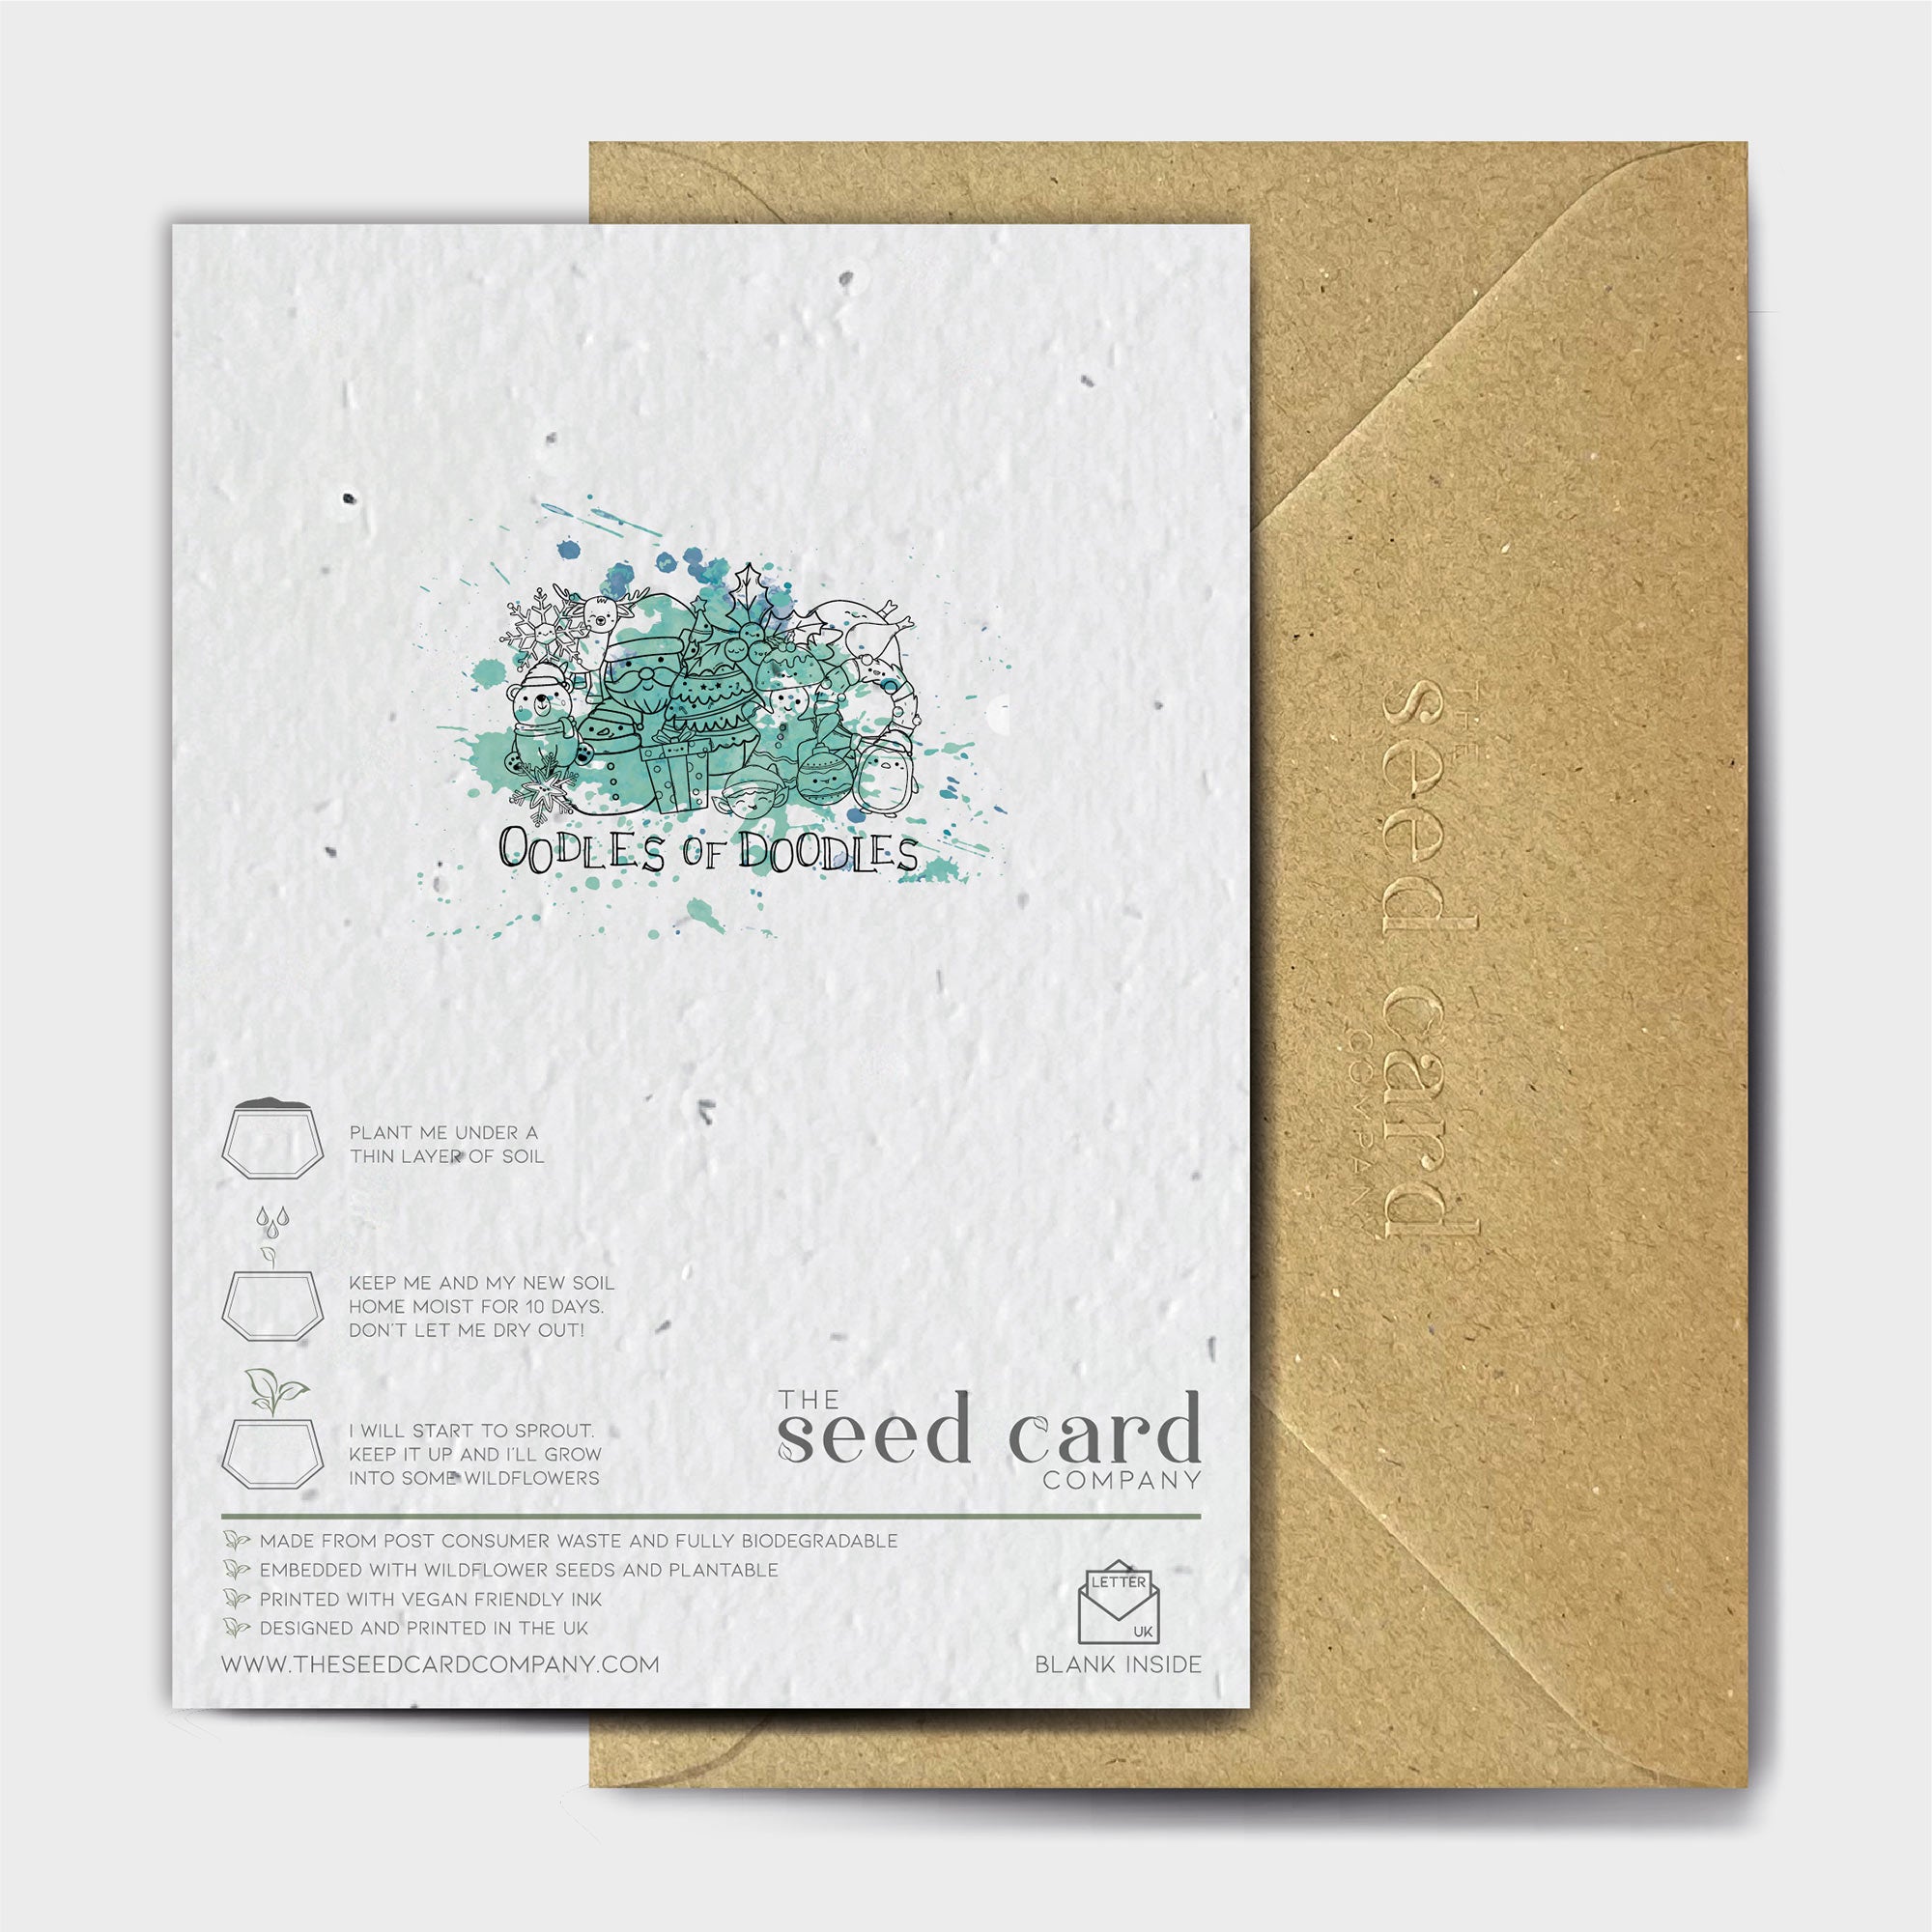 Shop online Another Incredi-bauble Pun - 100% biodegradable seed-embedded cards Shop -The Seed Card Company